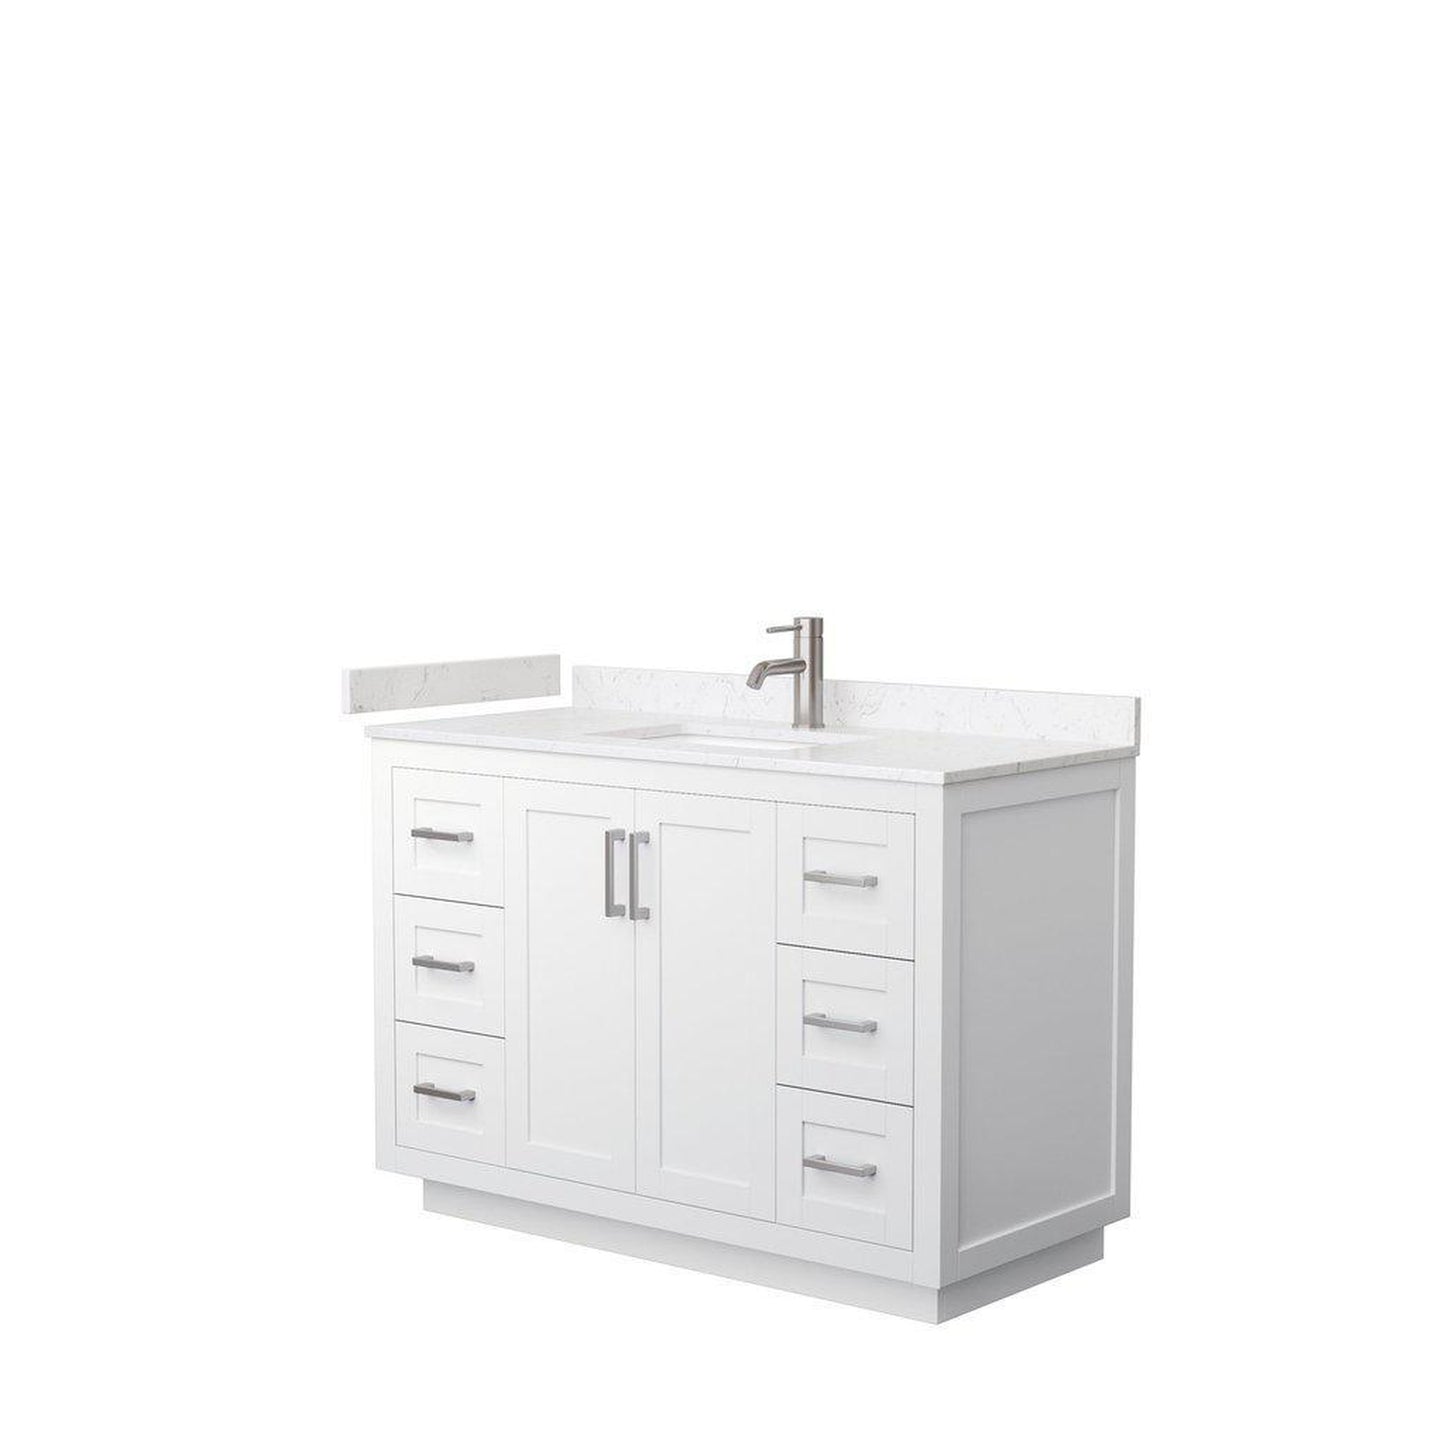 Wyndham Collection Miranda 48" Single Bathroom White Vanity Set With Light-Vein Carrara Cultured Marble Countertop, Undermount Square Sink, And Brushed Nickel Trim